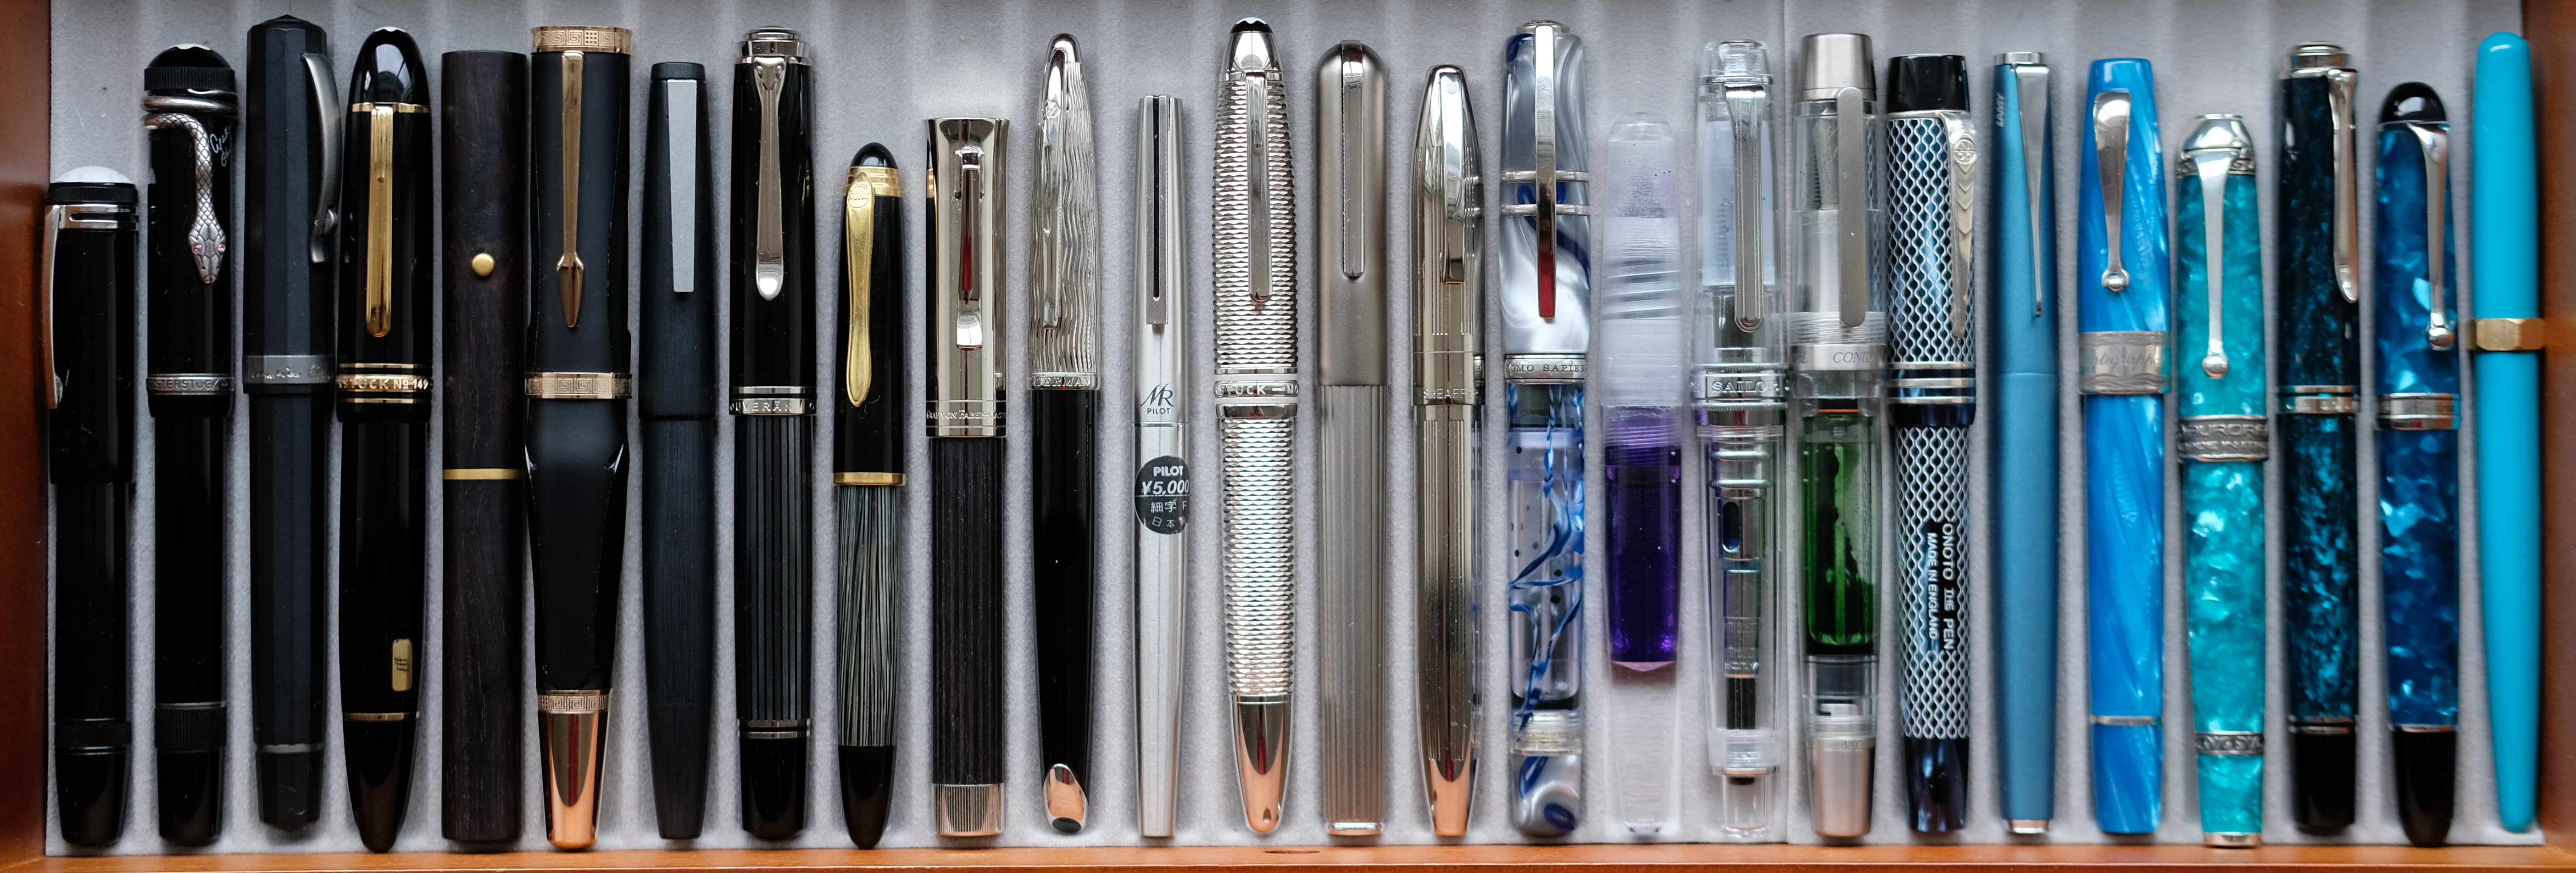 Fountain Pens From My Collection: Montblanc 149